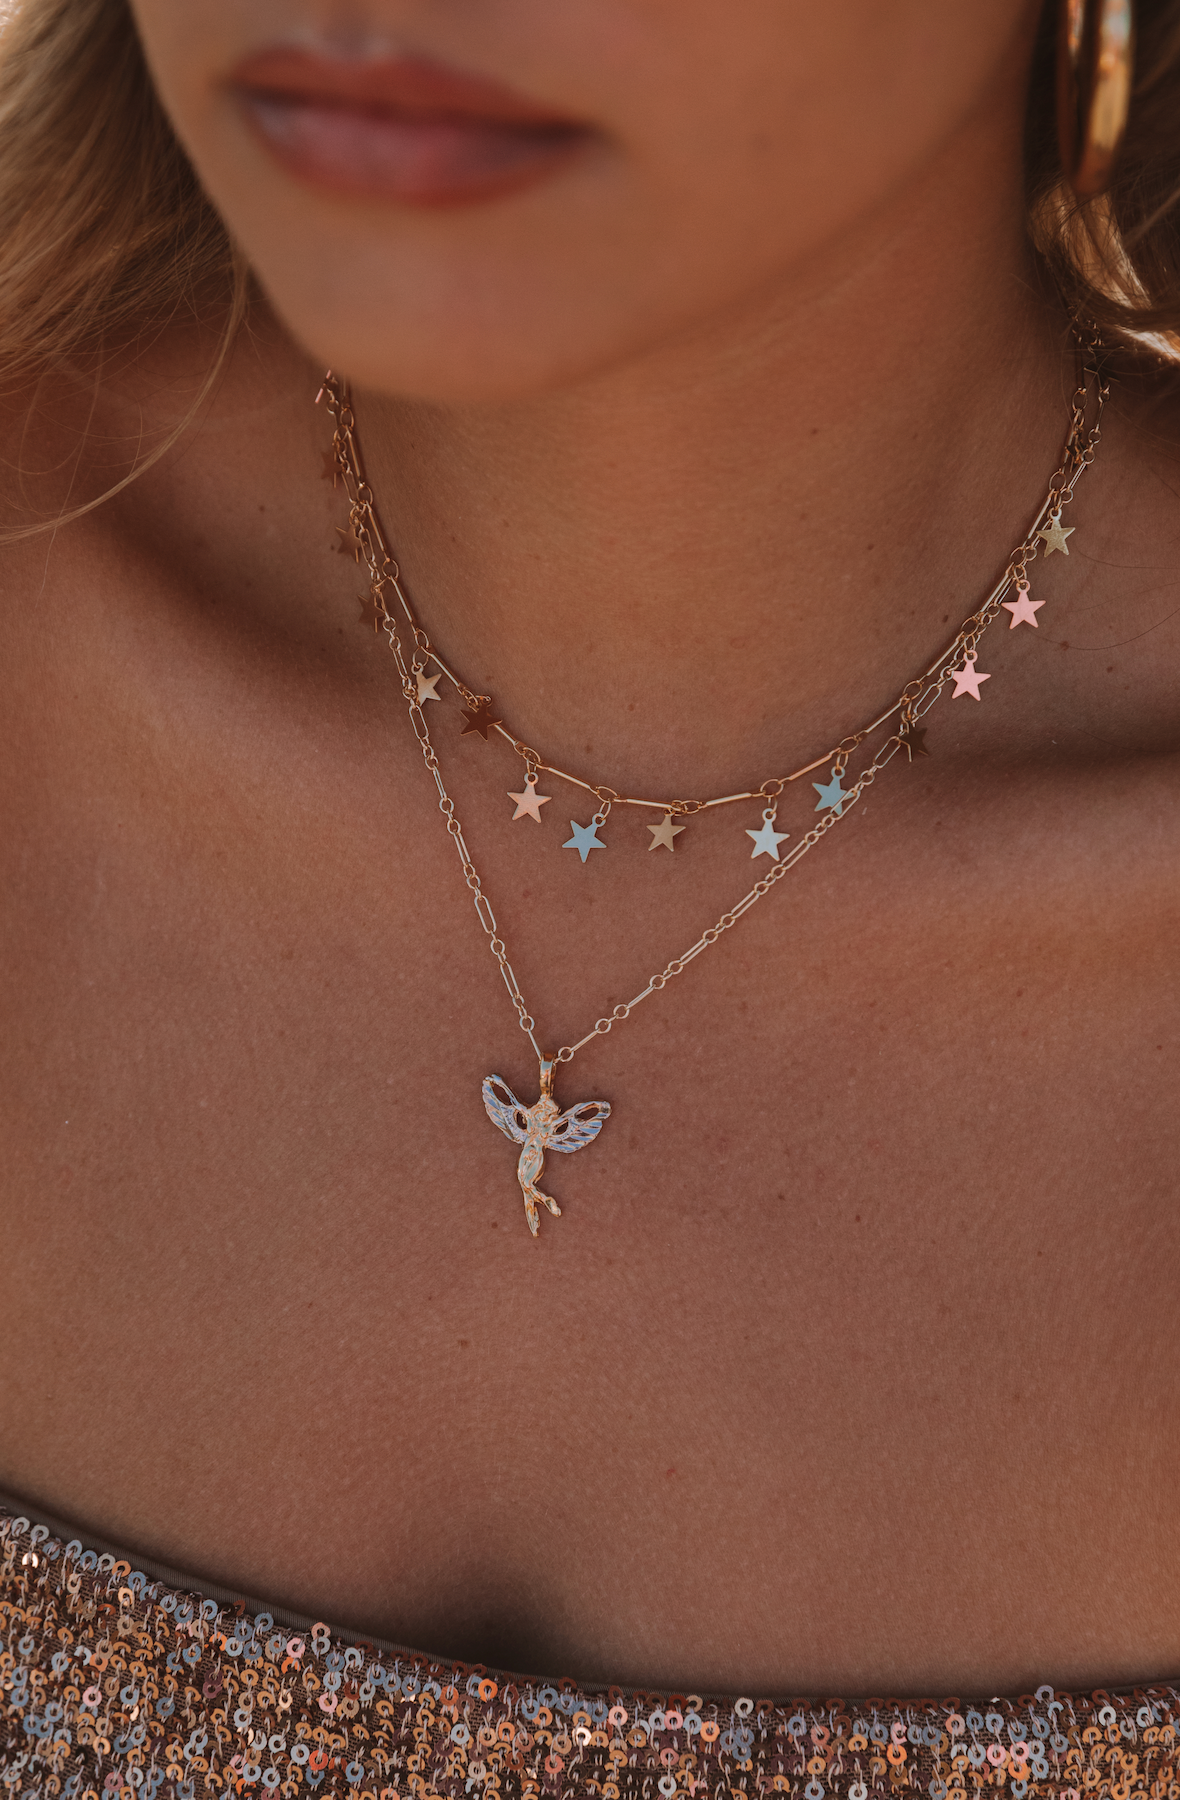 The Fairy Necklace